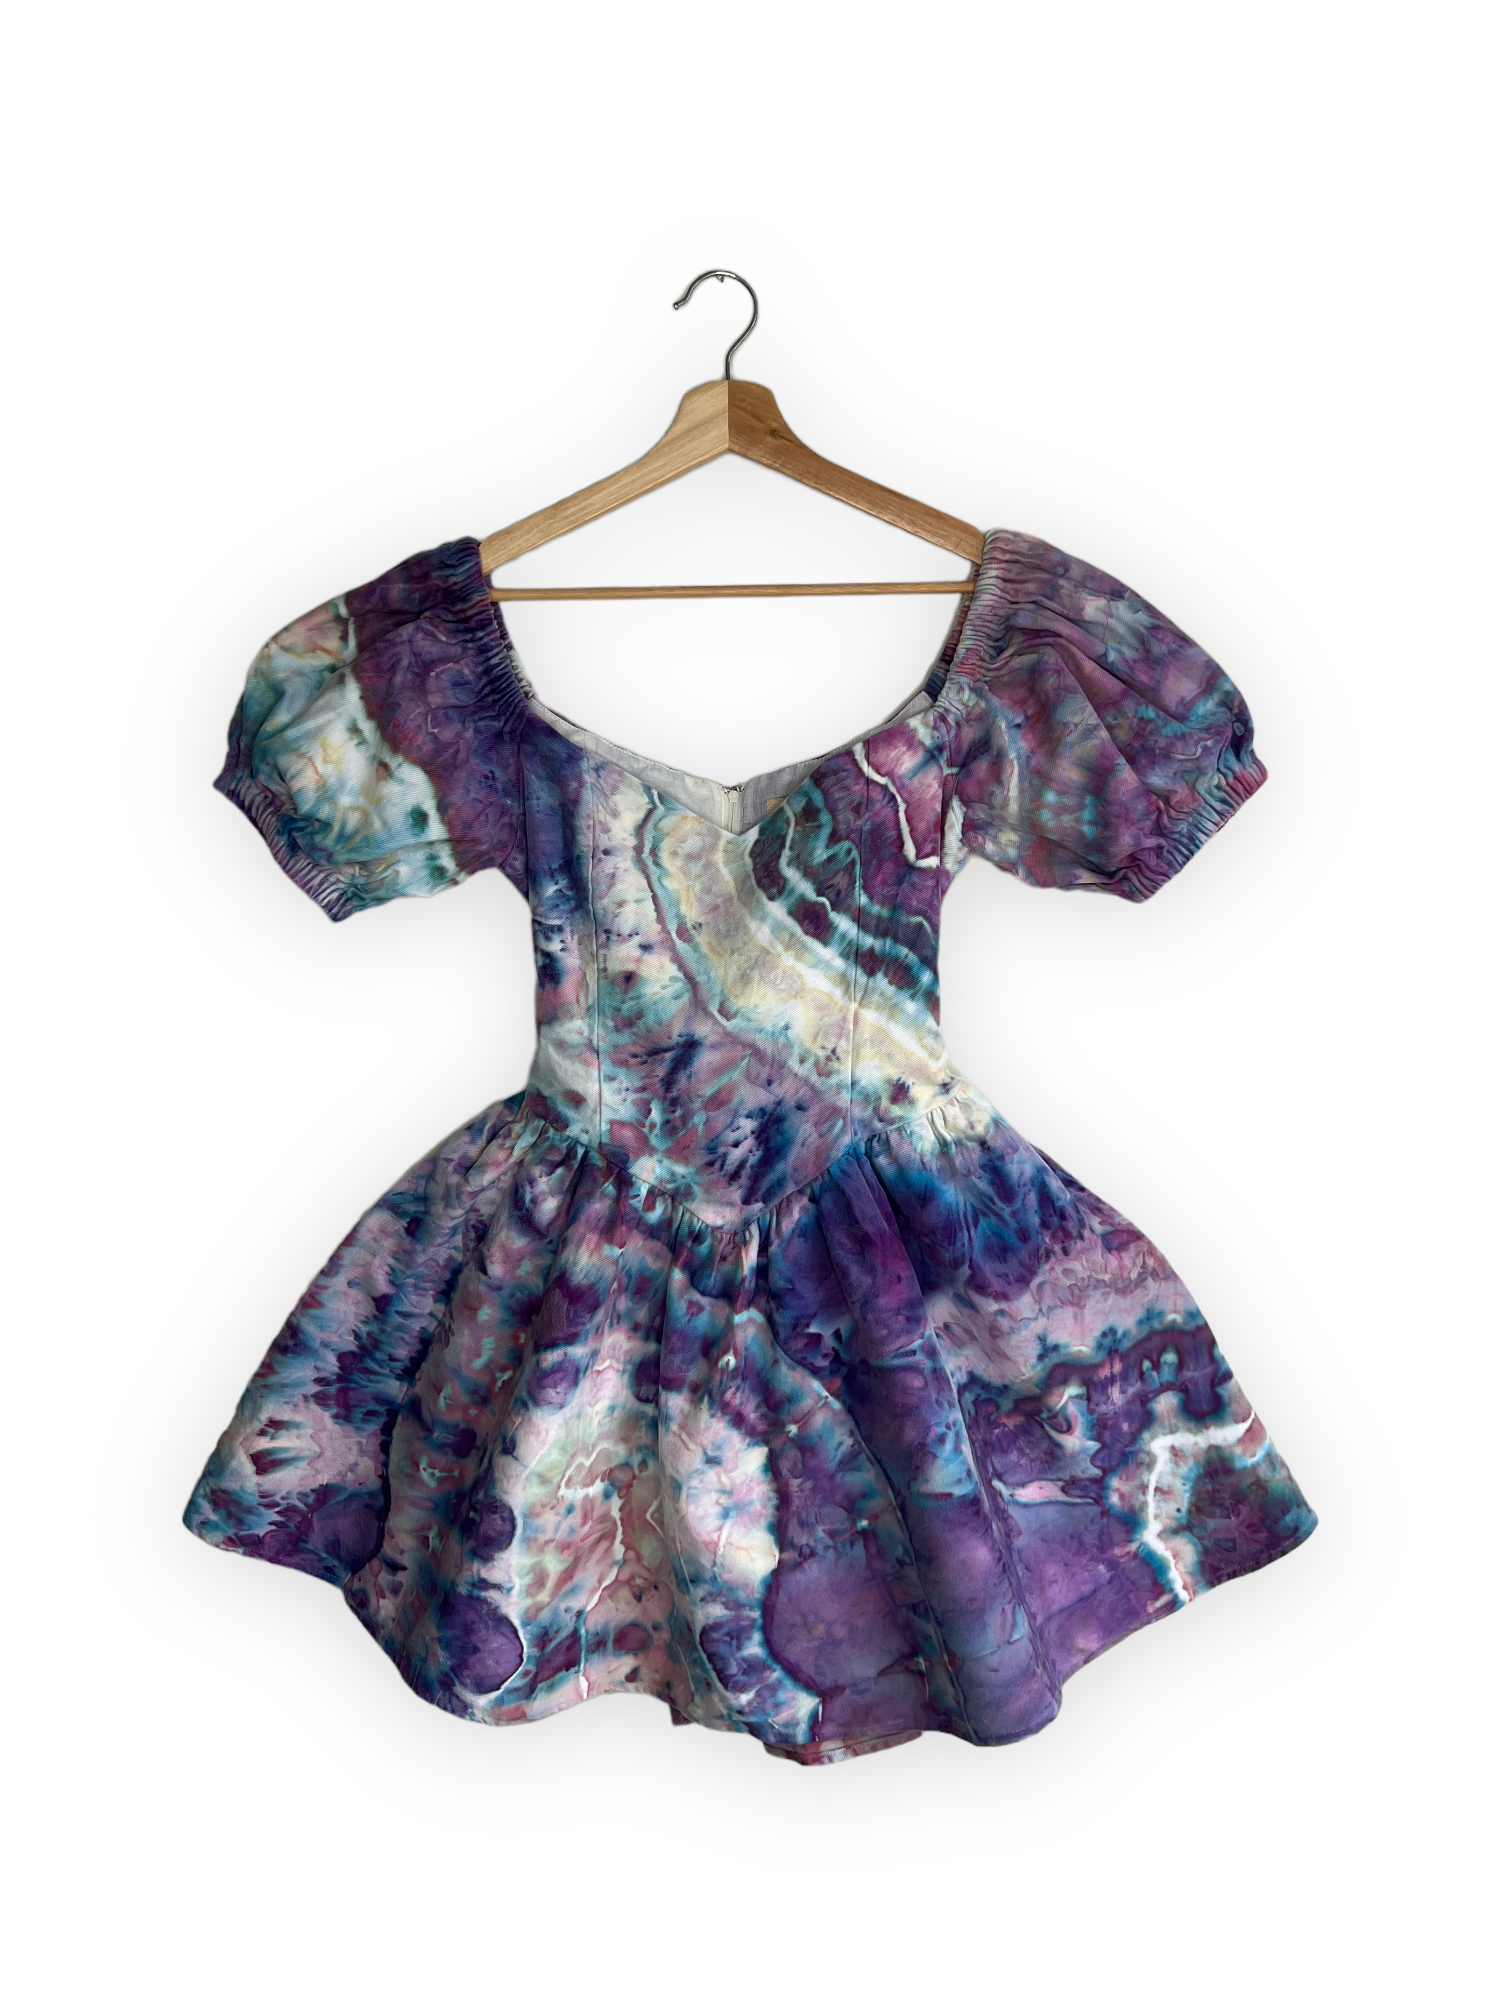 Fitted Dress with puff sleeves tie dyed with pinks and purples